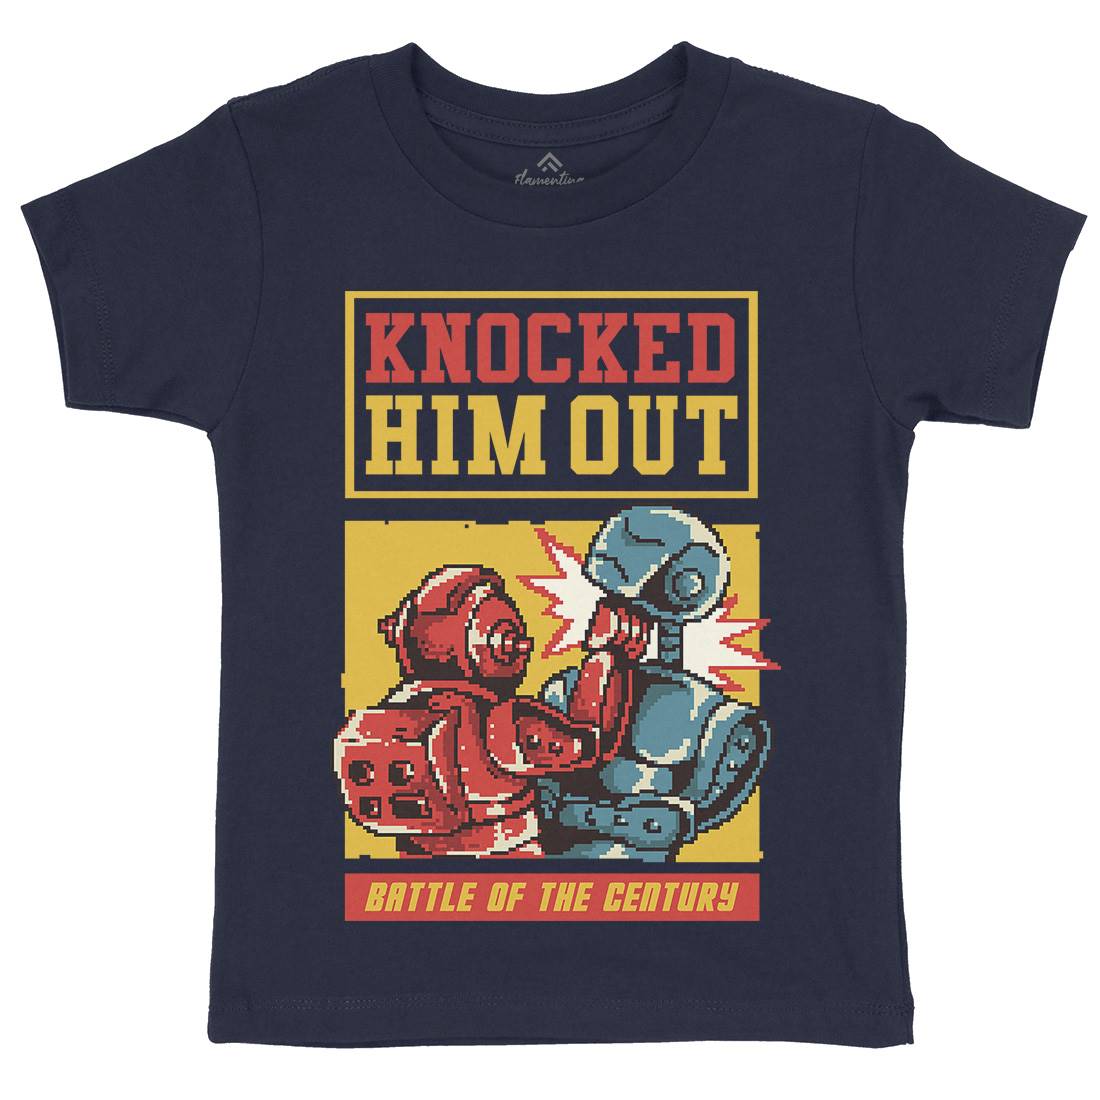 Knocked Him Out Kids Crew Neck T-Shirt Space B923